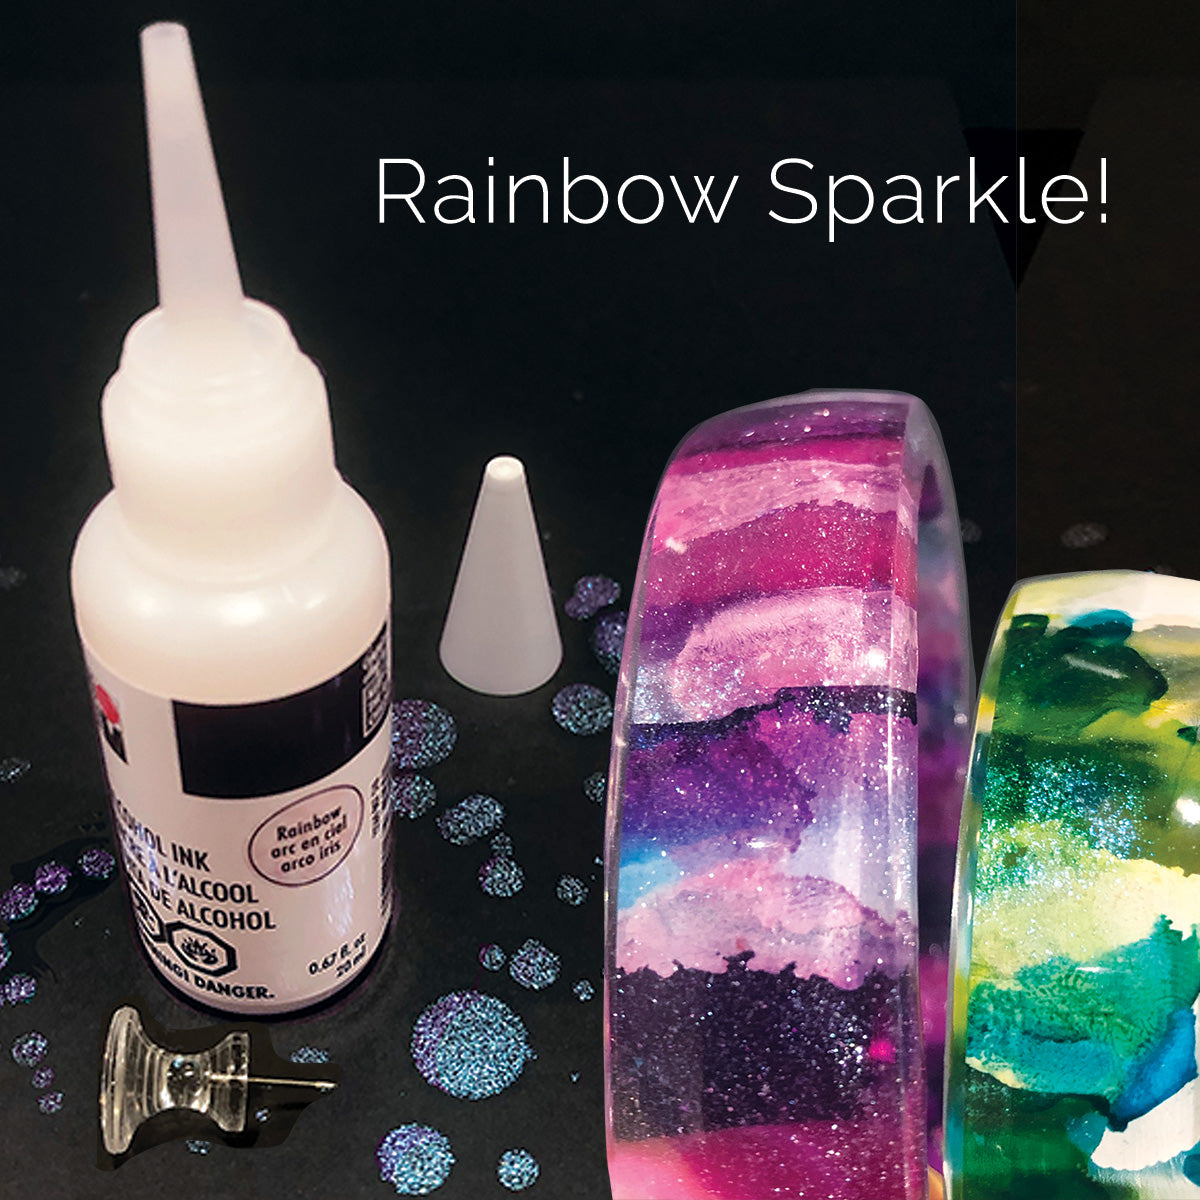 Rainbow Sparkle Alcohol Ink - Resin Craft and Jewelry Making Projects –  Little Windows Brilliant Resin and Supplies